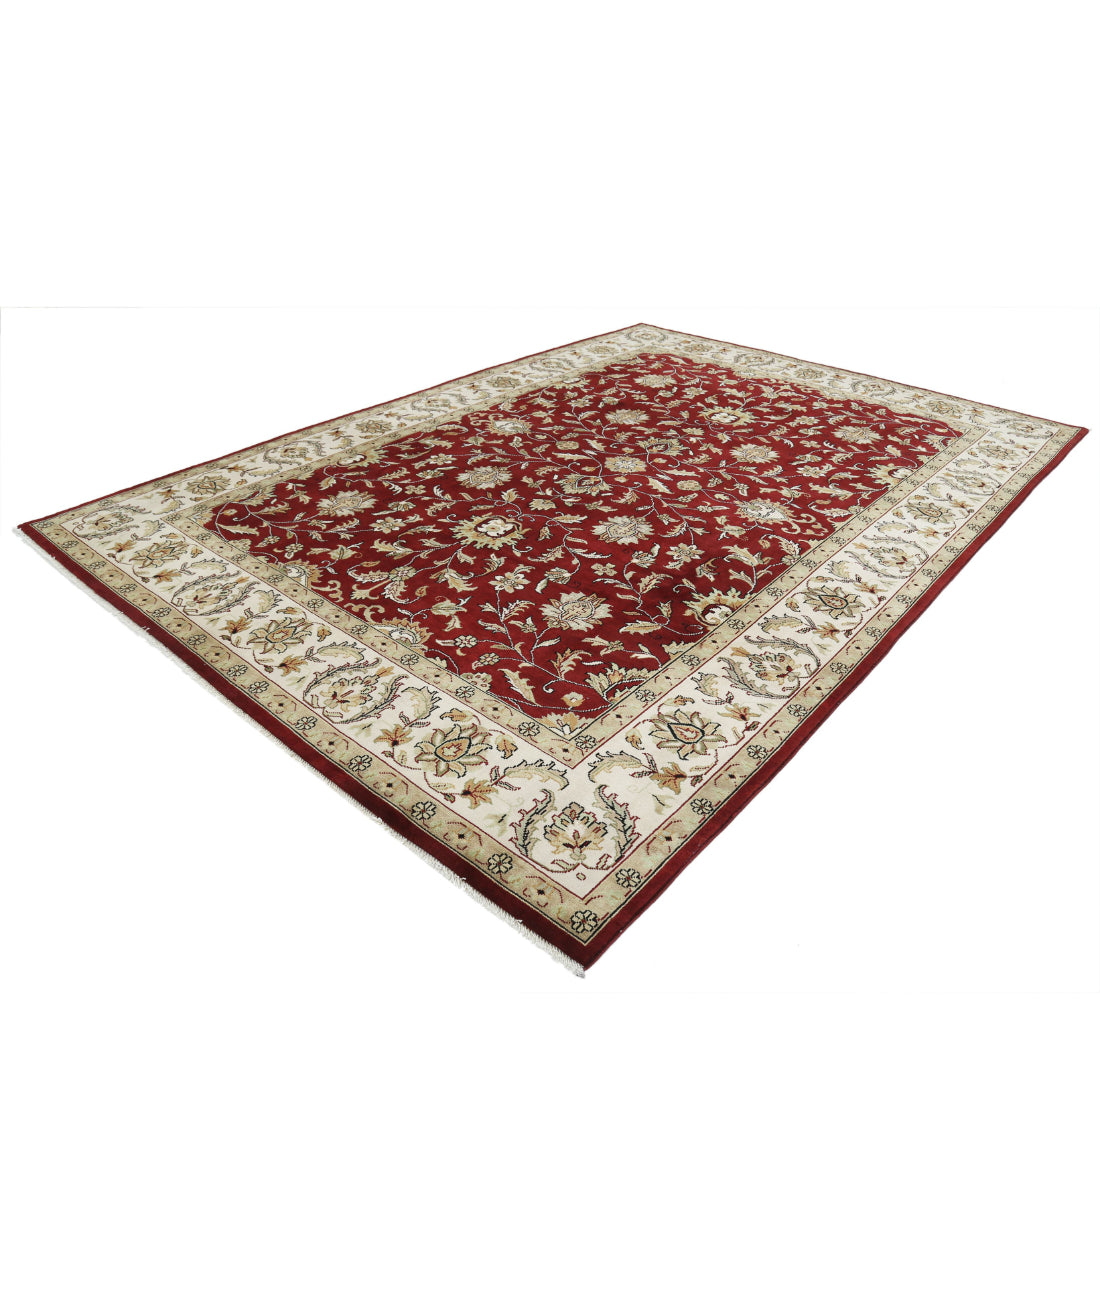 Ziegler 8'6'' X 11'11'' Hand-Knotted Wool Rug 8'6'' x 11'11'' (255 X 358) / Red / N/A